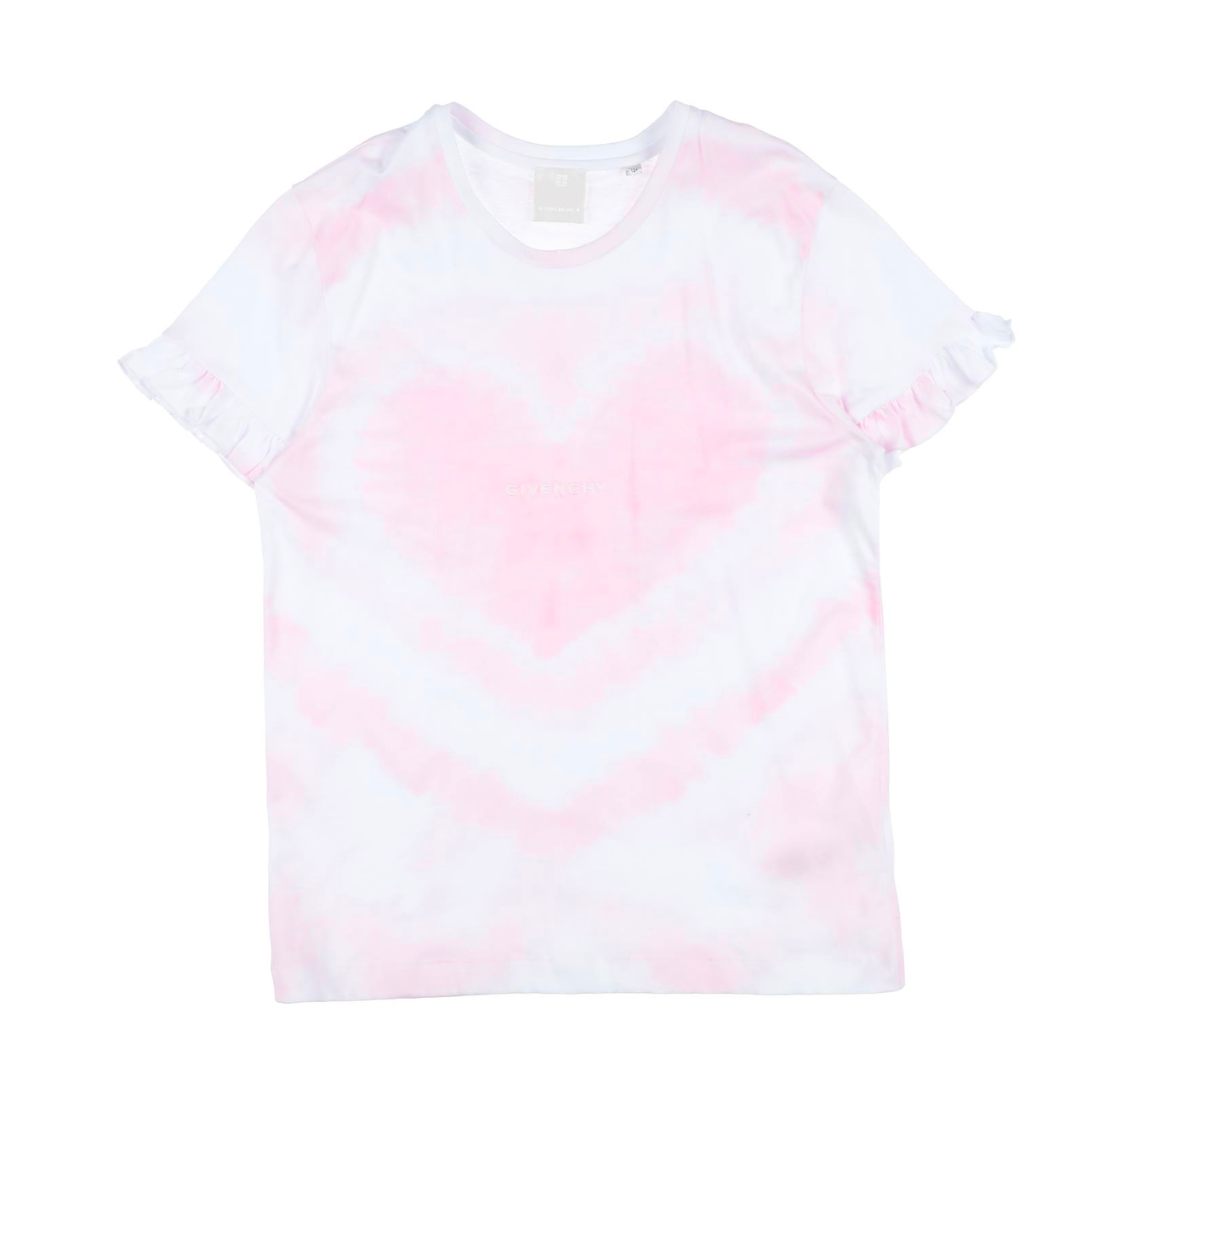 GIVENCHY - Pink tie-dye T-shirt - 6 years old